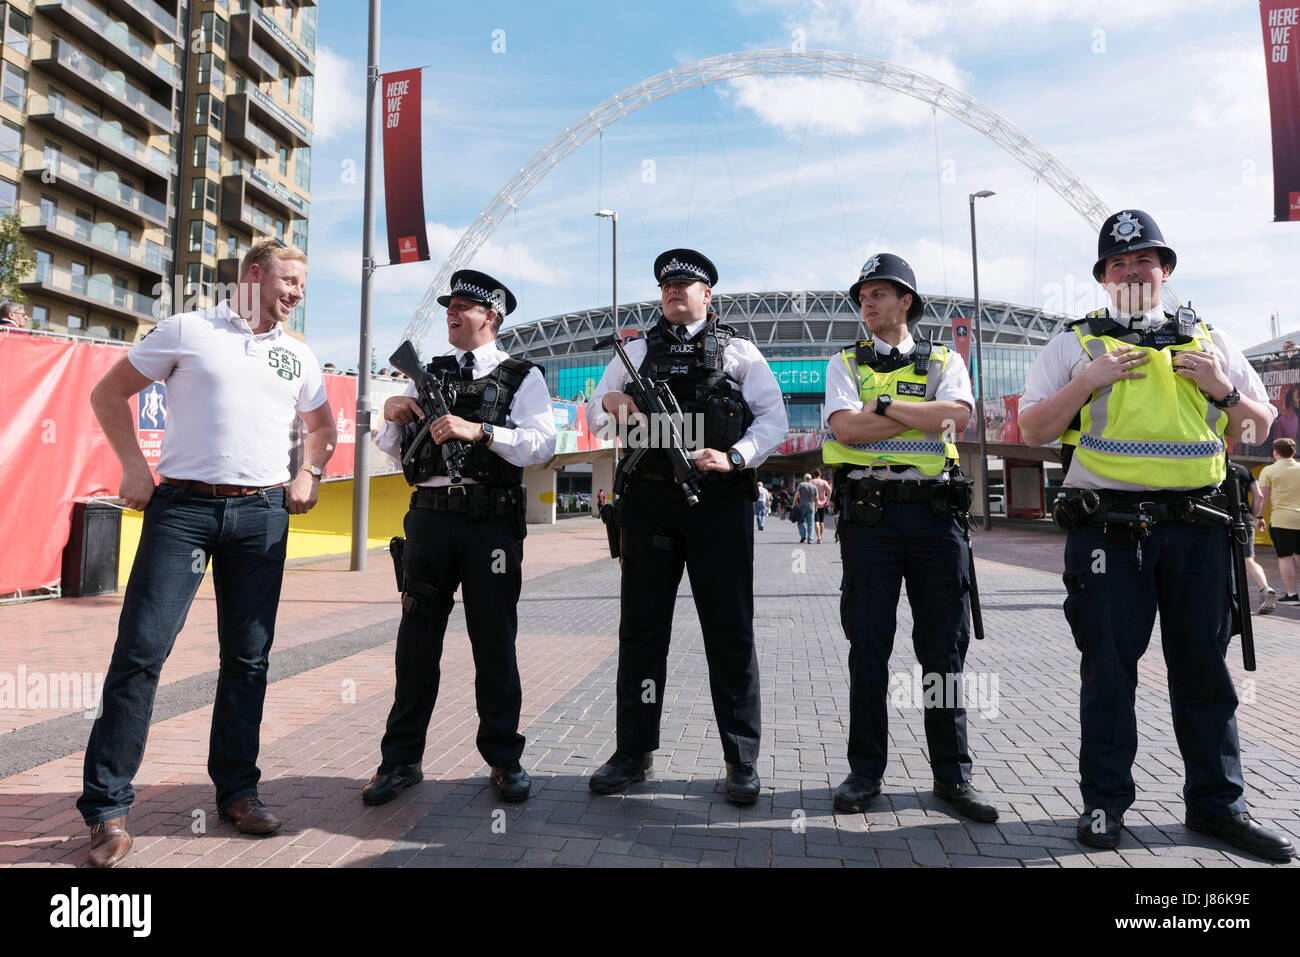 London, Britain. 27th May, 2017. Armed policemen are on patrol as security precautions are stepped up for Arsenal and Chelsea fans arriving at Wembley stadium for the FA Cup football finals in London, Britain, on May 27, 2017. The security level was in response to Manchester Arena bombing when 22 people died and 66 people were injured in one of the most deadly attacks in the UK. Credit: Ray Tang/Xinhua/Alamy Live News Stock Photo